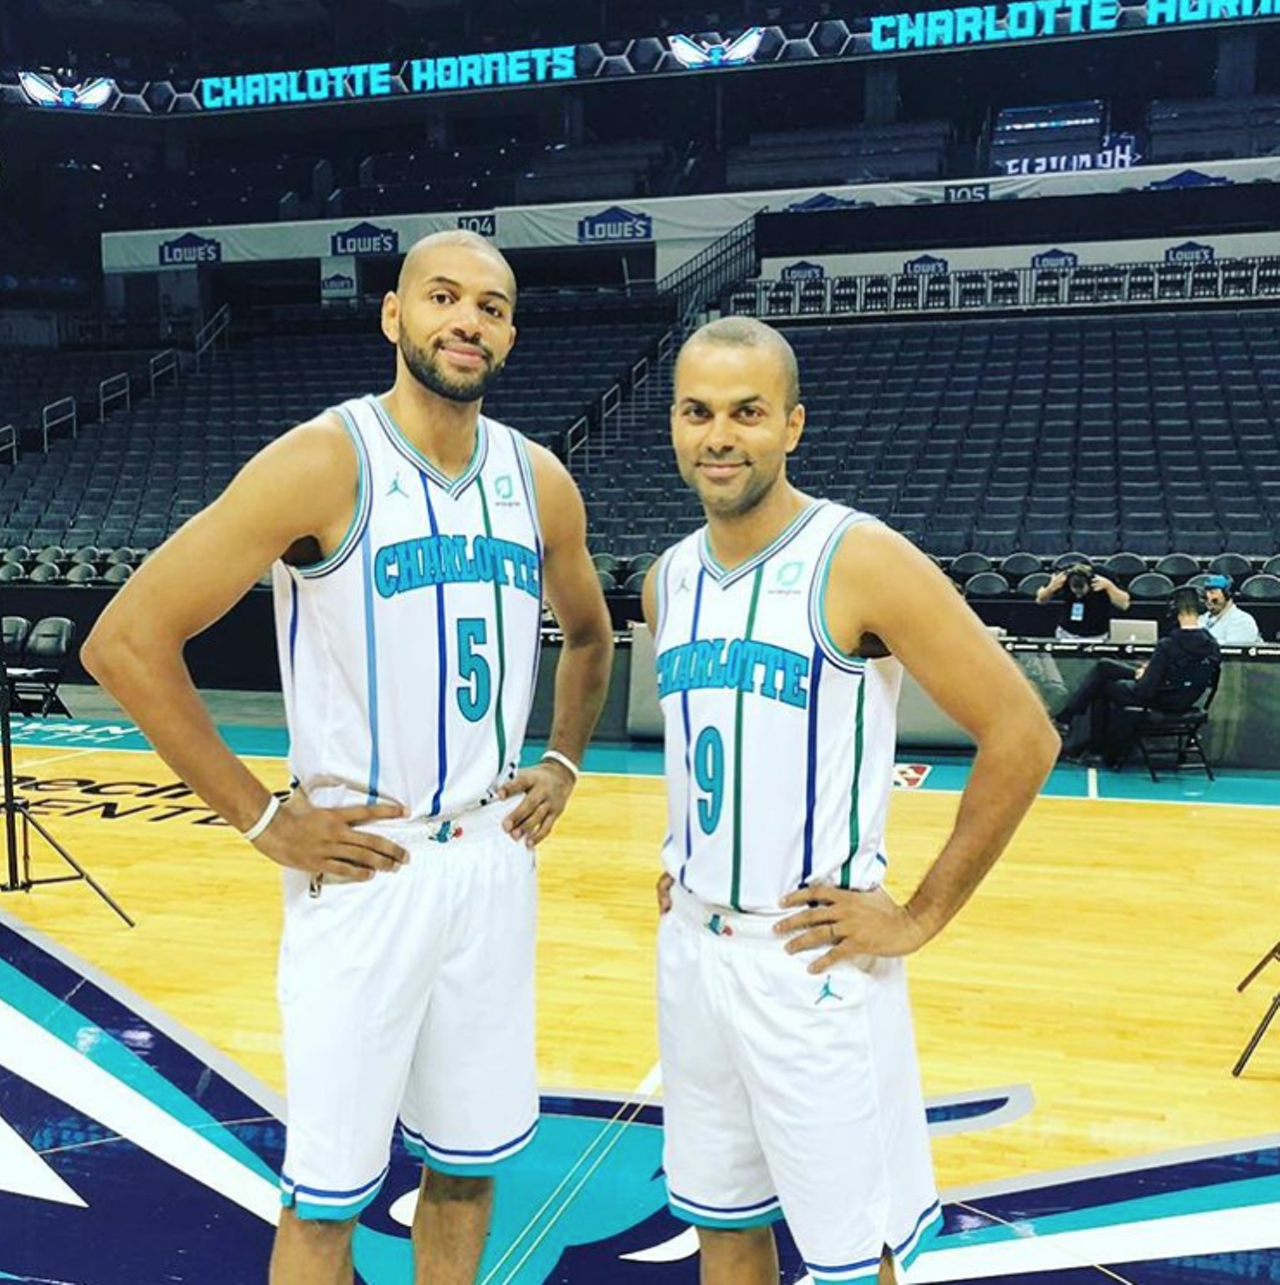 Tony Parker in a Hornets uniform
We don’t know whether to laugh or cry, so maybe we’ll do both. Tony Parker in anything other than a Spurs jersey looks weird AF, but if you’re a true fan and already have his Hornets jersey, you might as well pay tribute to the Frenchman.
Photo via Instagram / _tonyparker09